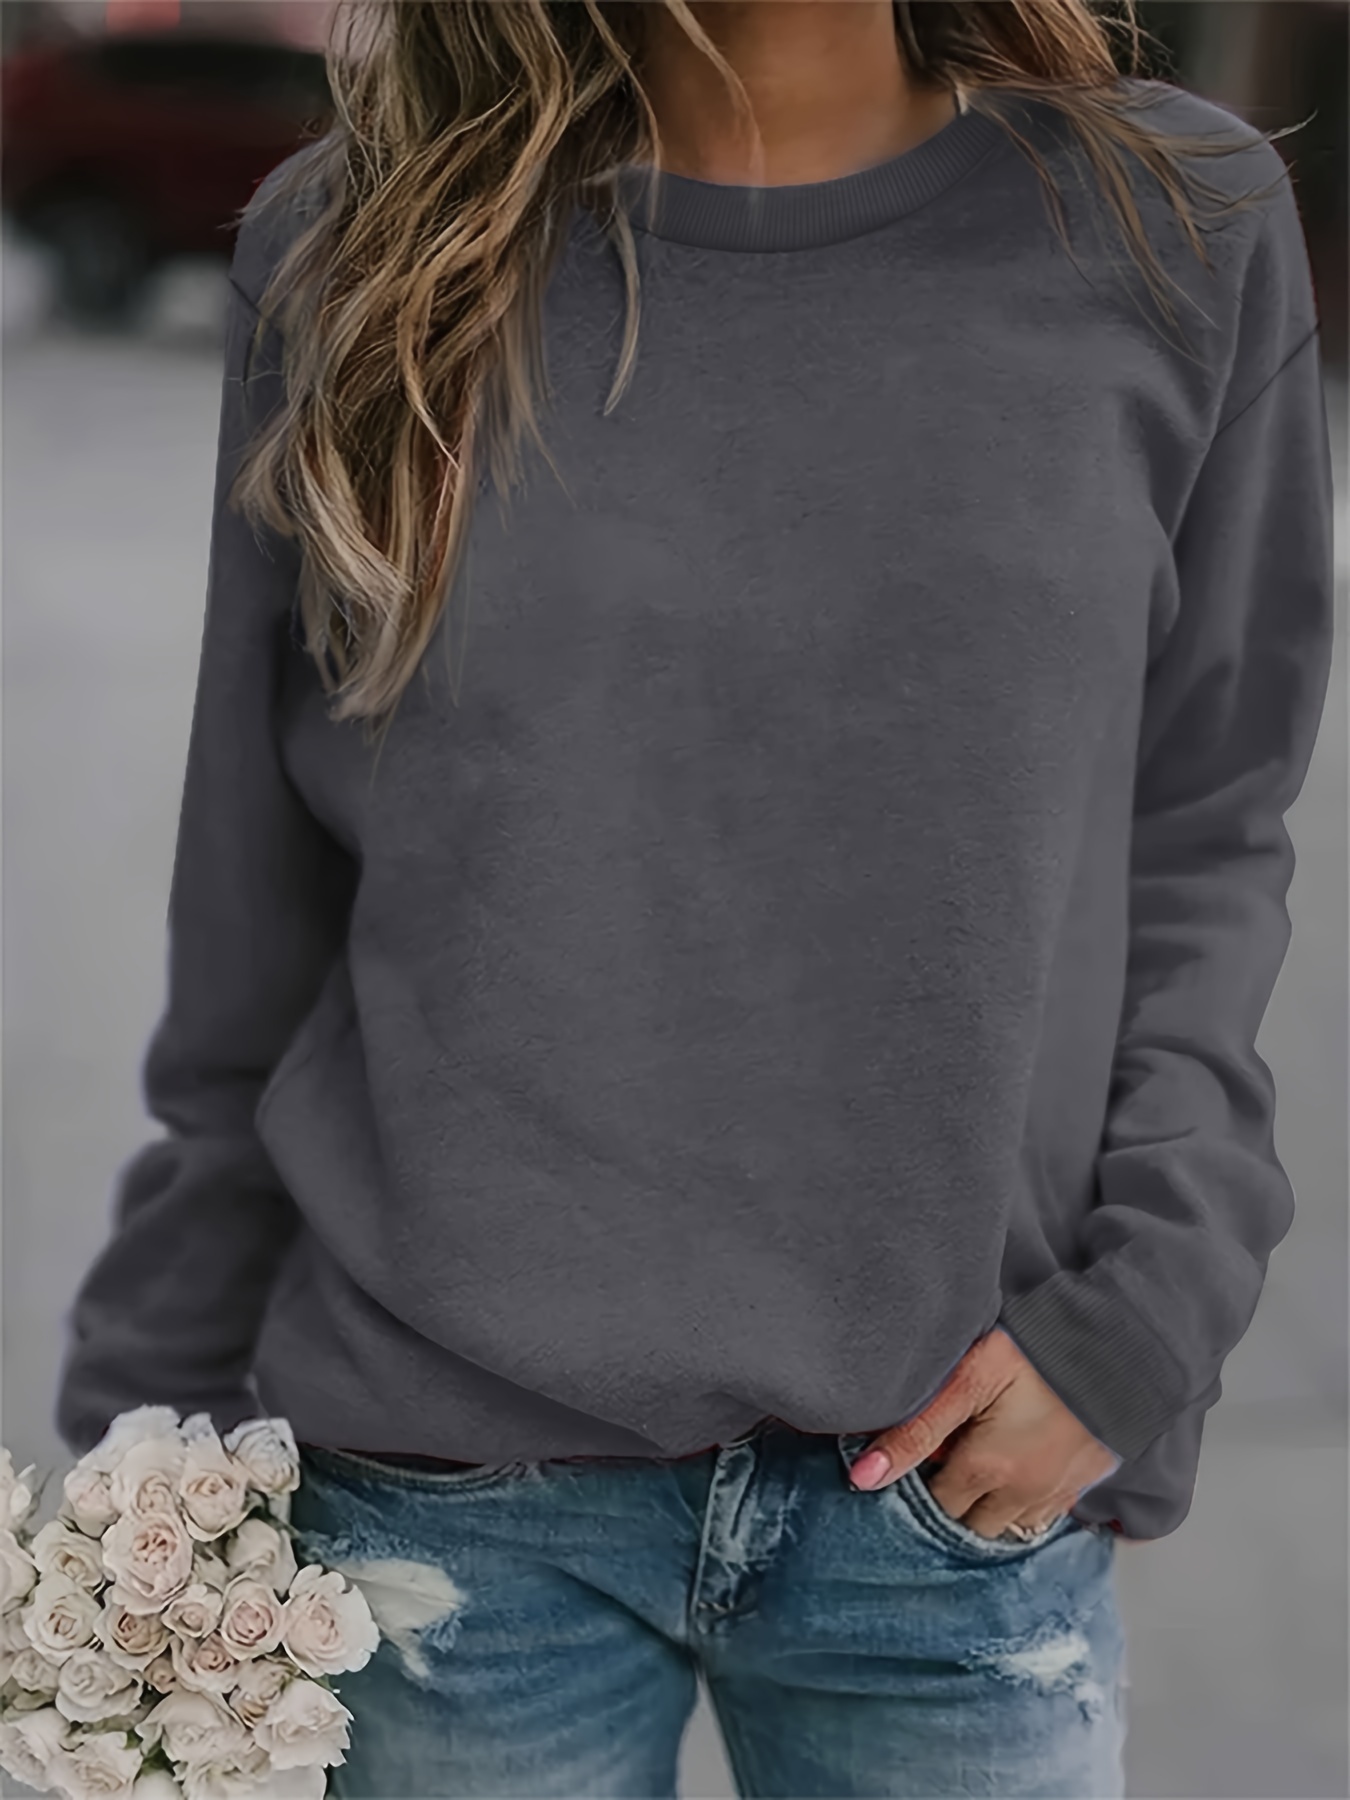 Sweatshirts For Women Loose Fit, Casual Fashion Long Sleeve Solid